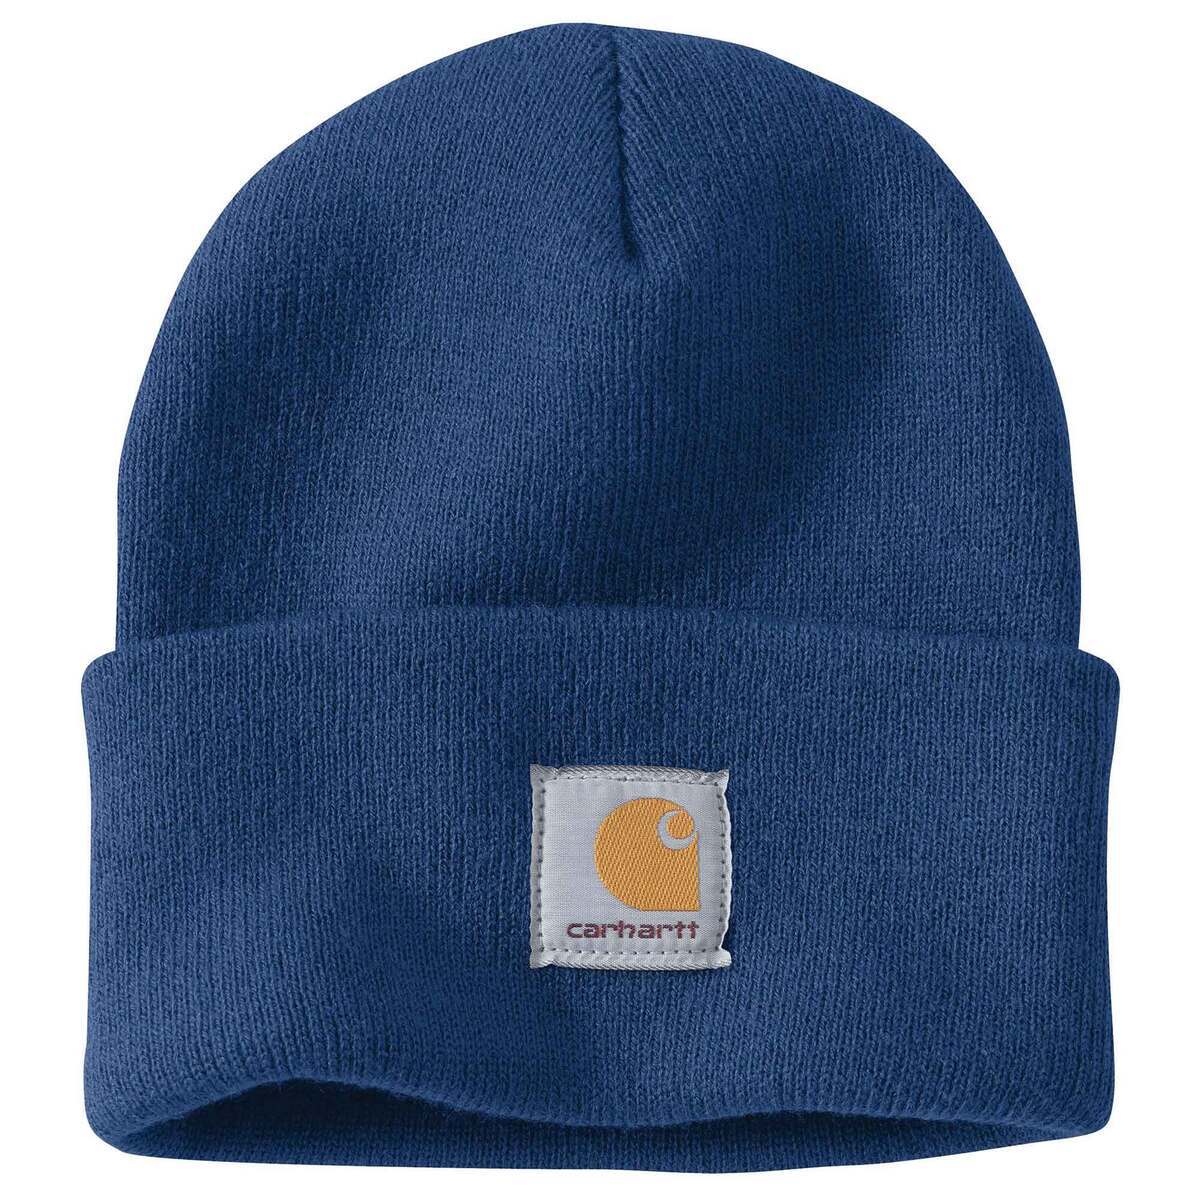 Carhartt Knit Cuffed Beanie - Lakeshore - One Size Fits Most ...